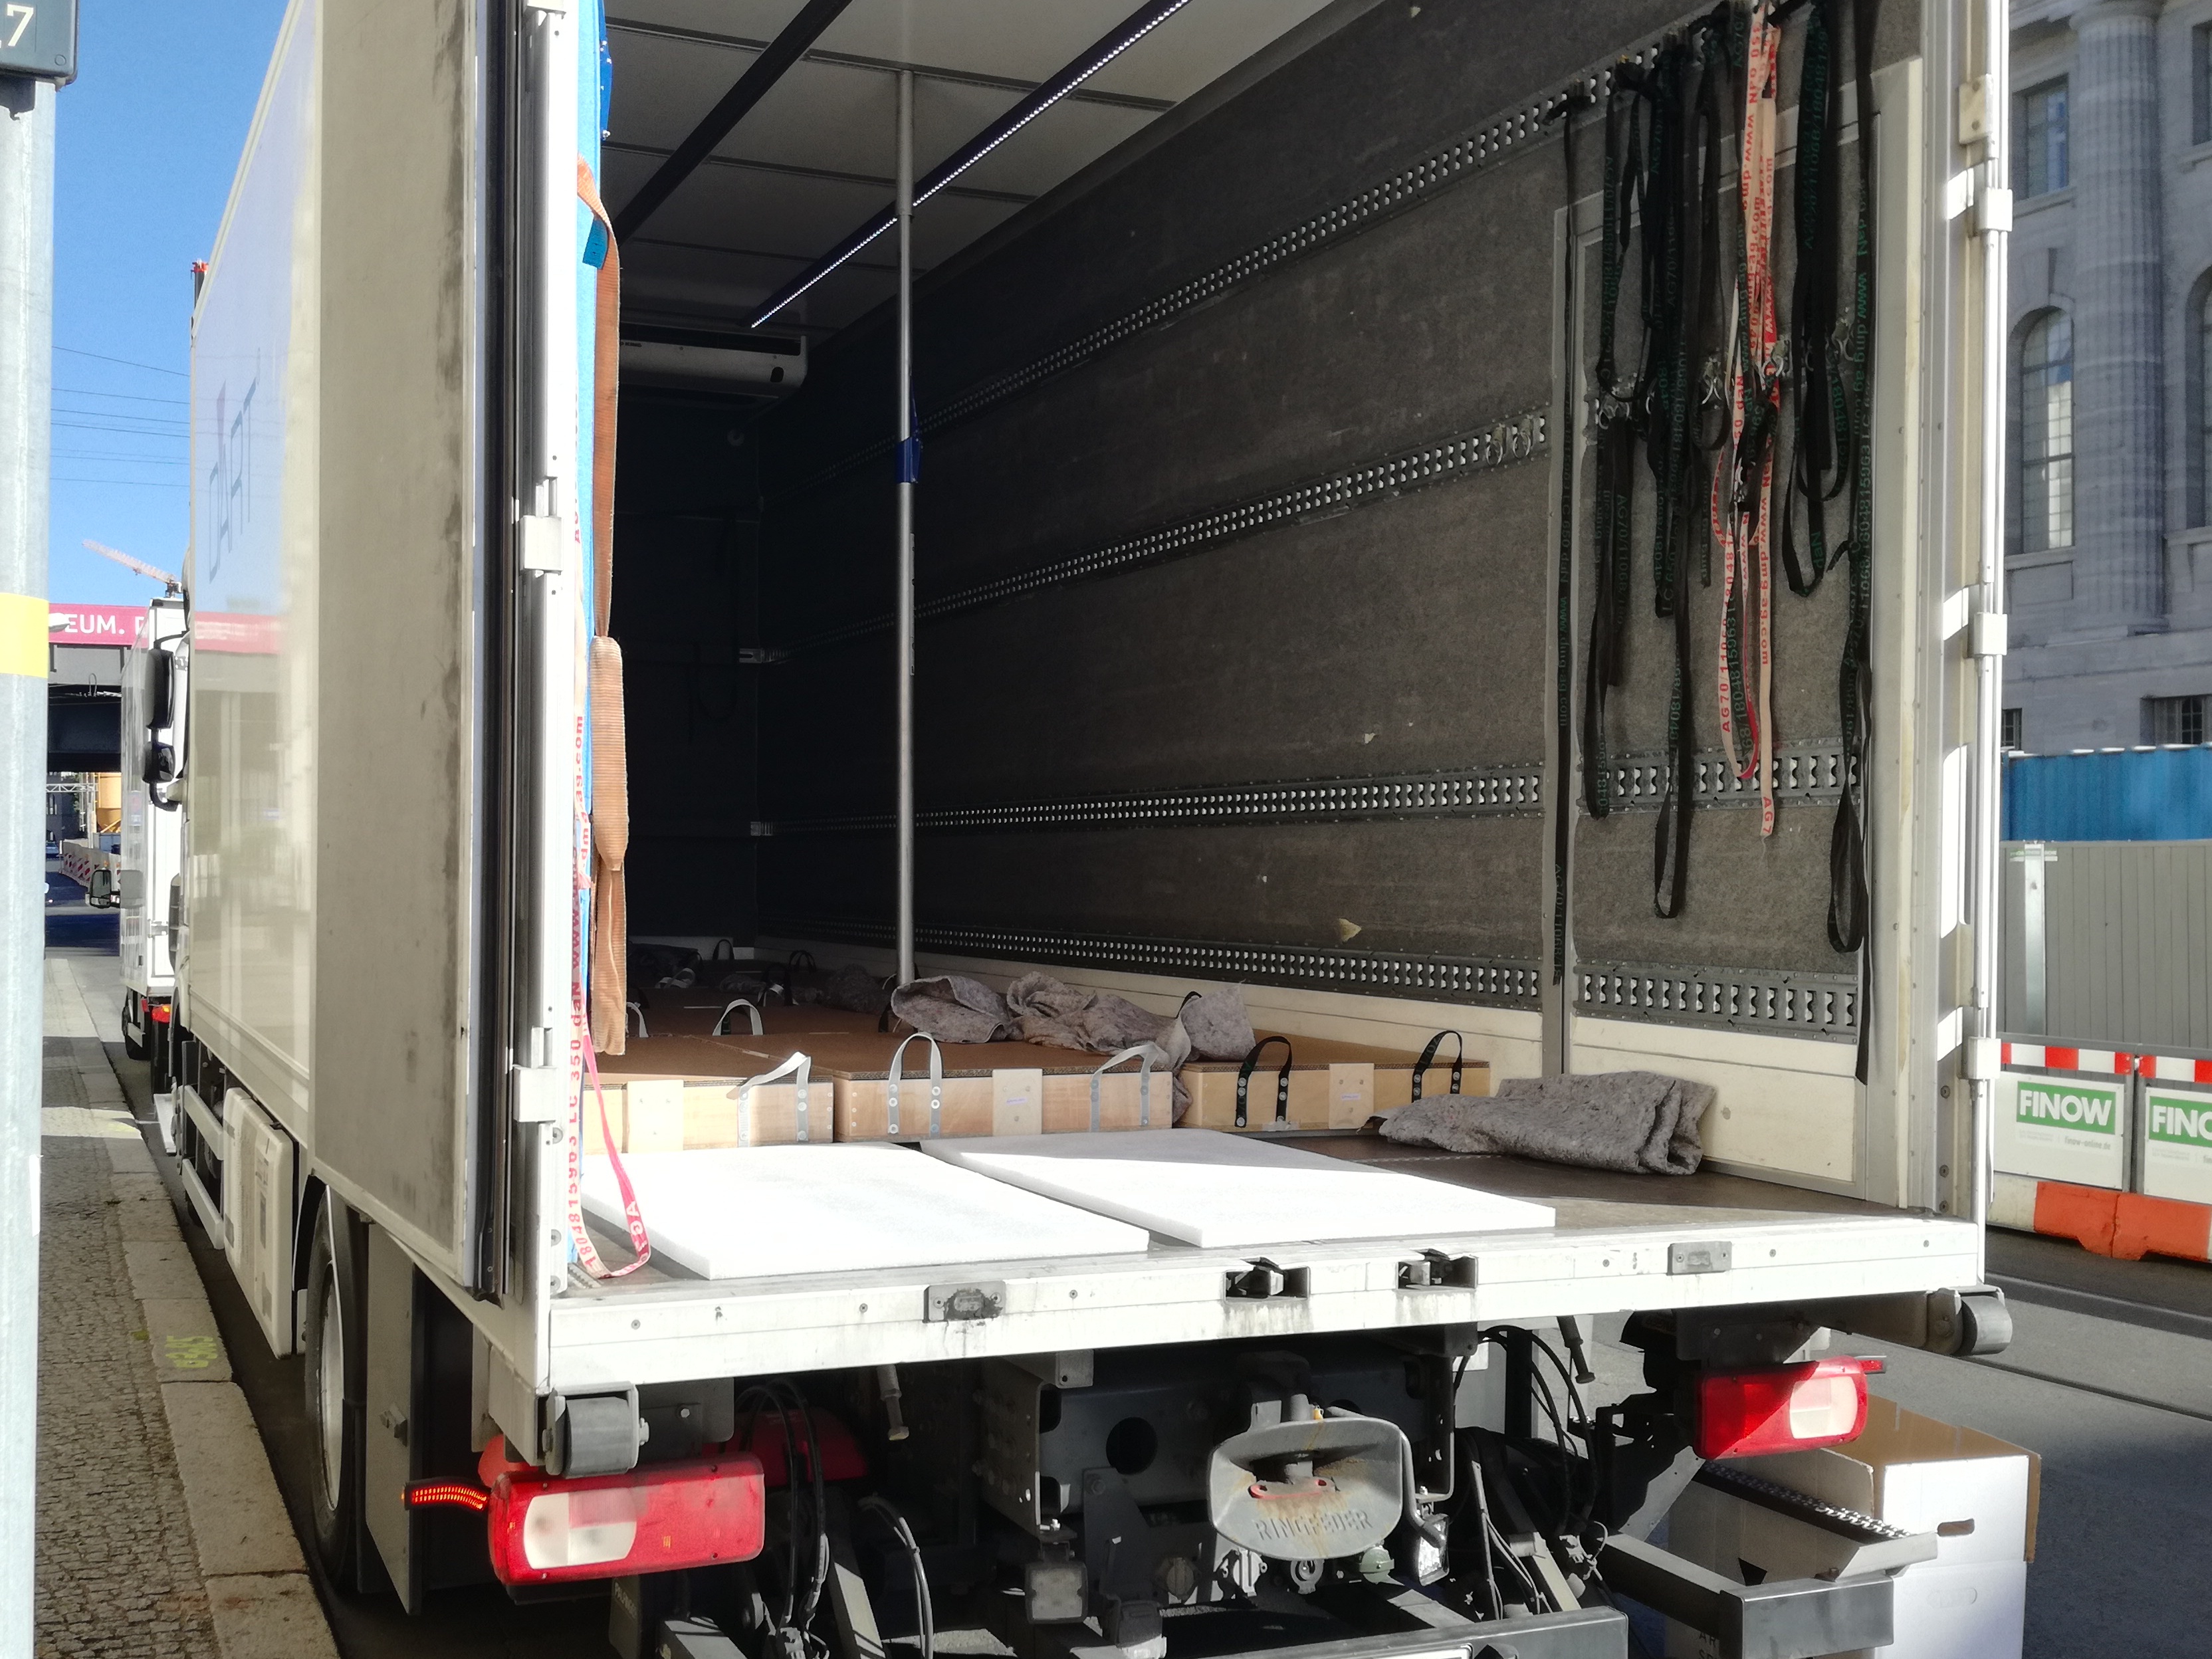 A temperature-controlled, air-conditioned truck is loaded. Foto: Susanna Schulz